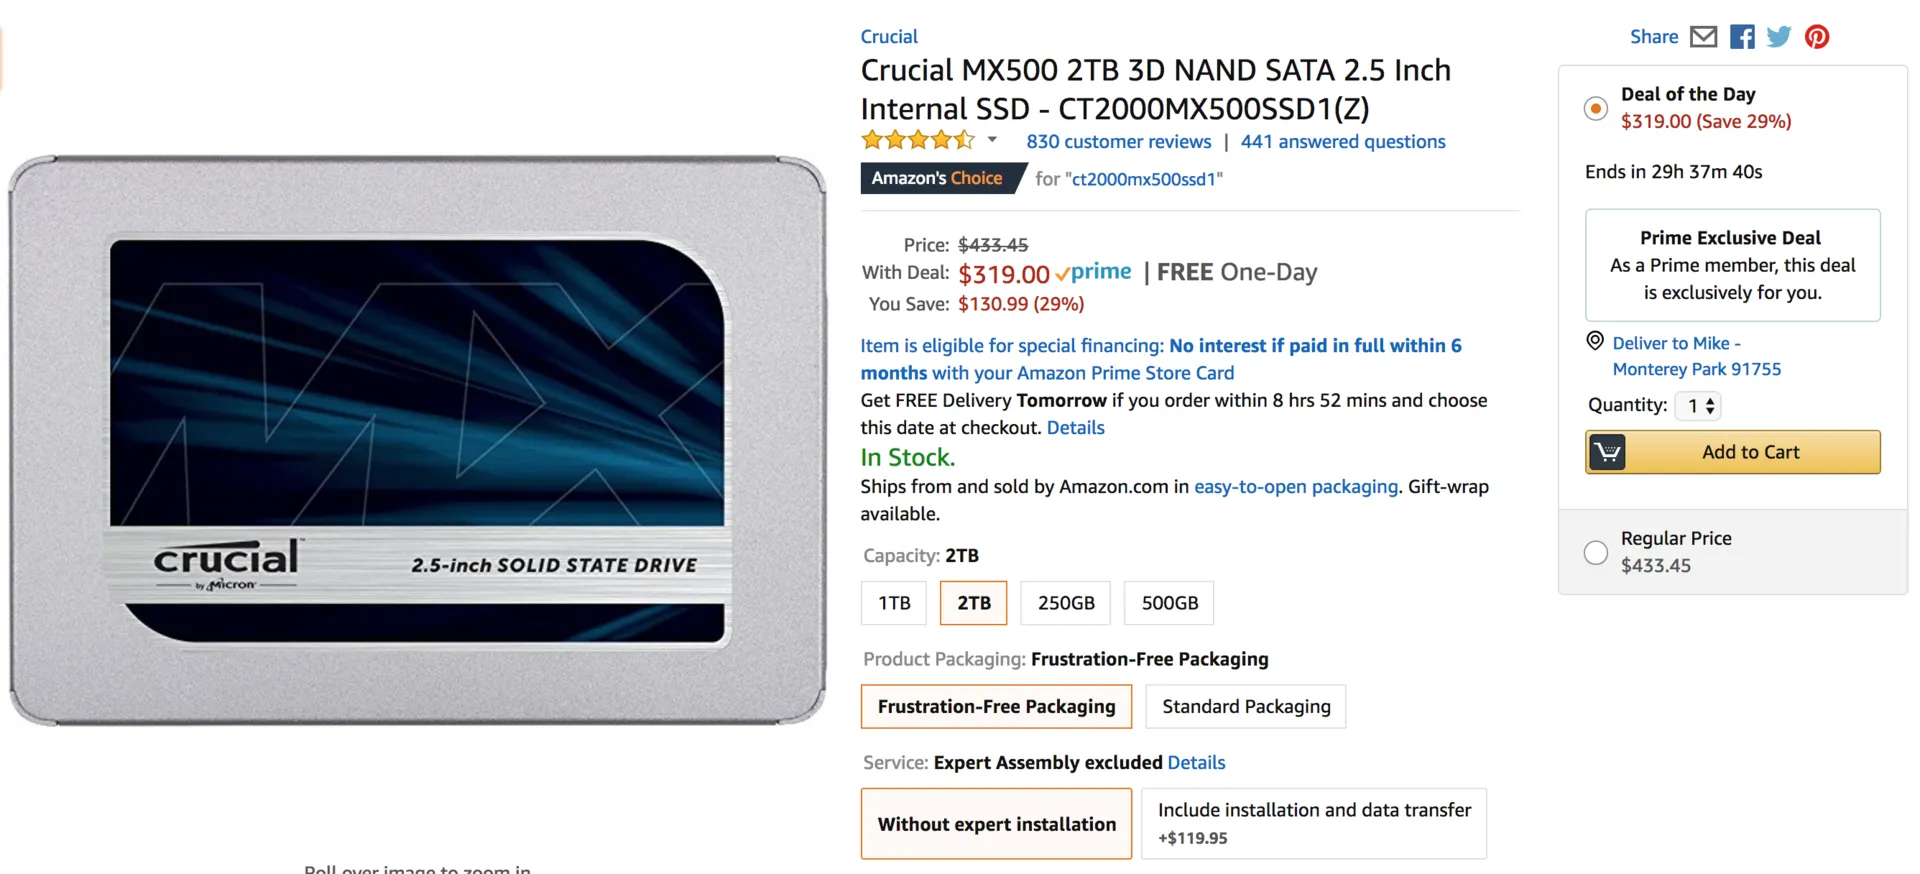 Crucial MX500 2TB SSD for $319 on Prime Day